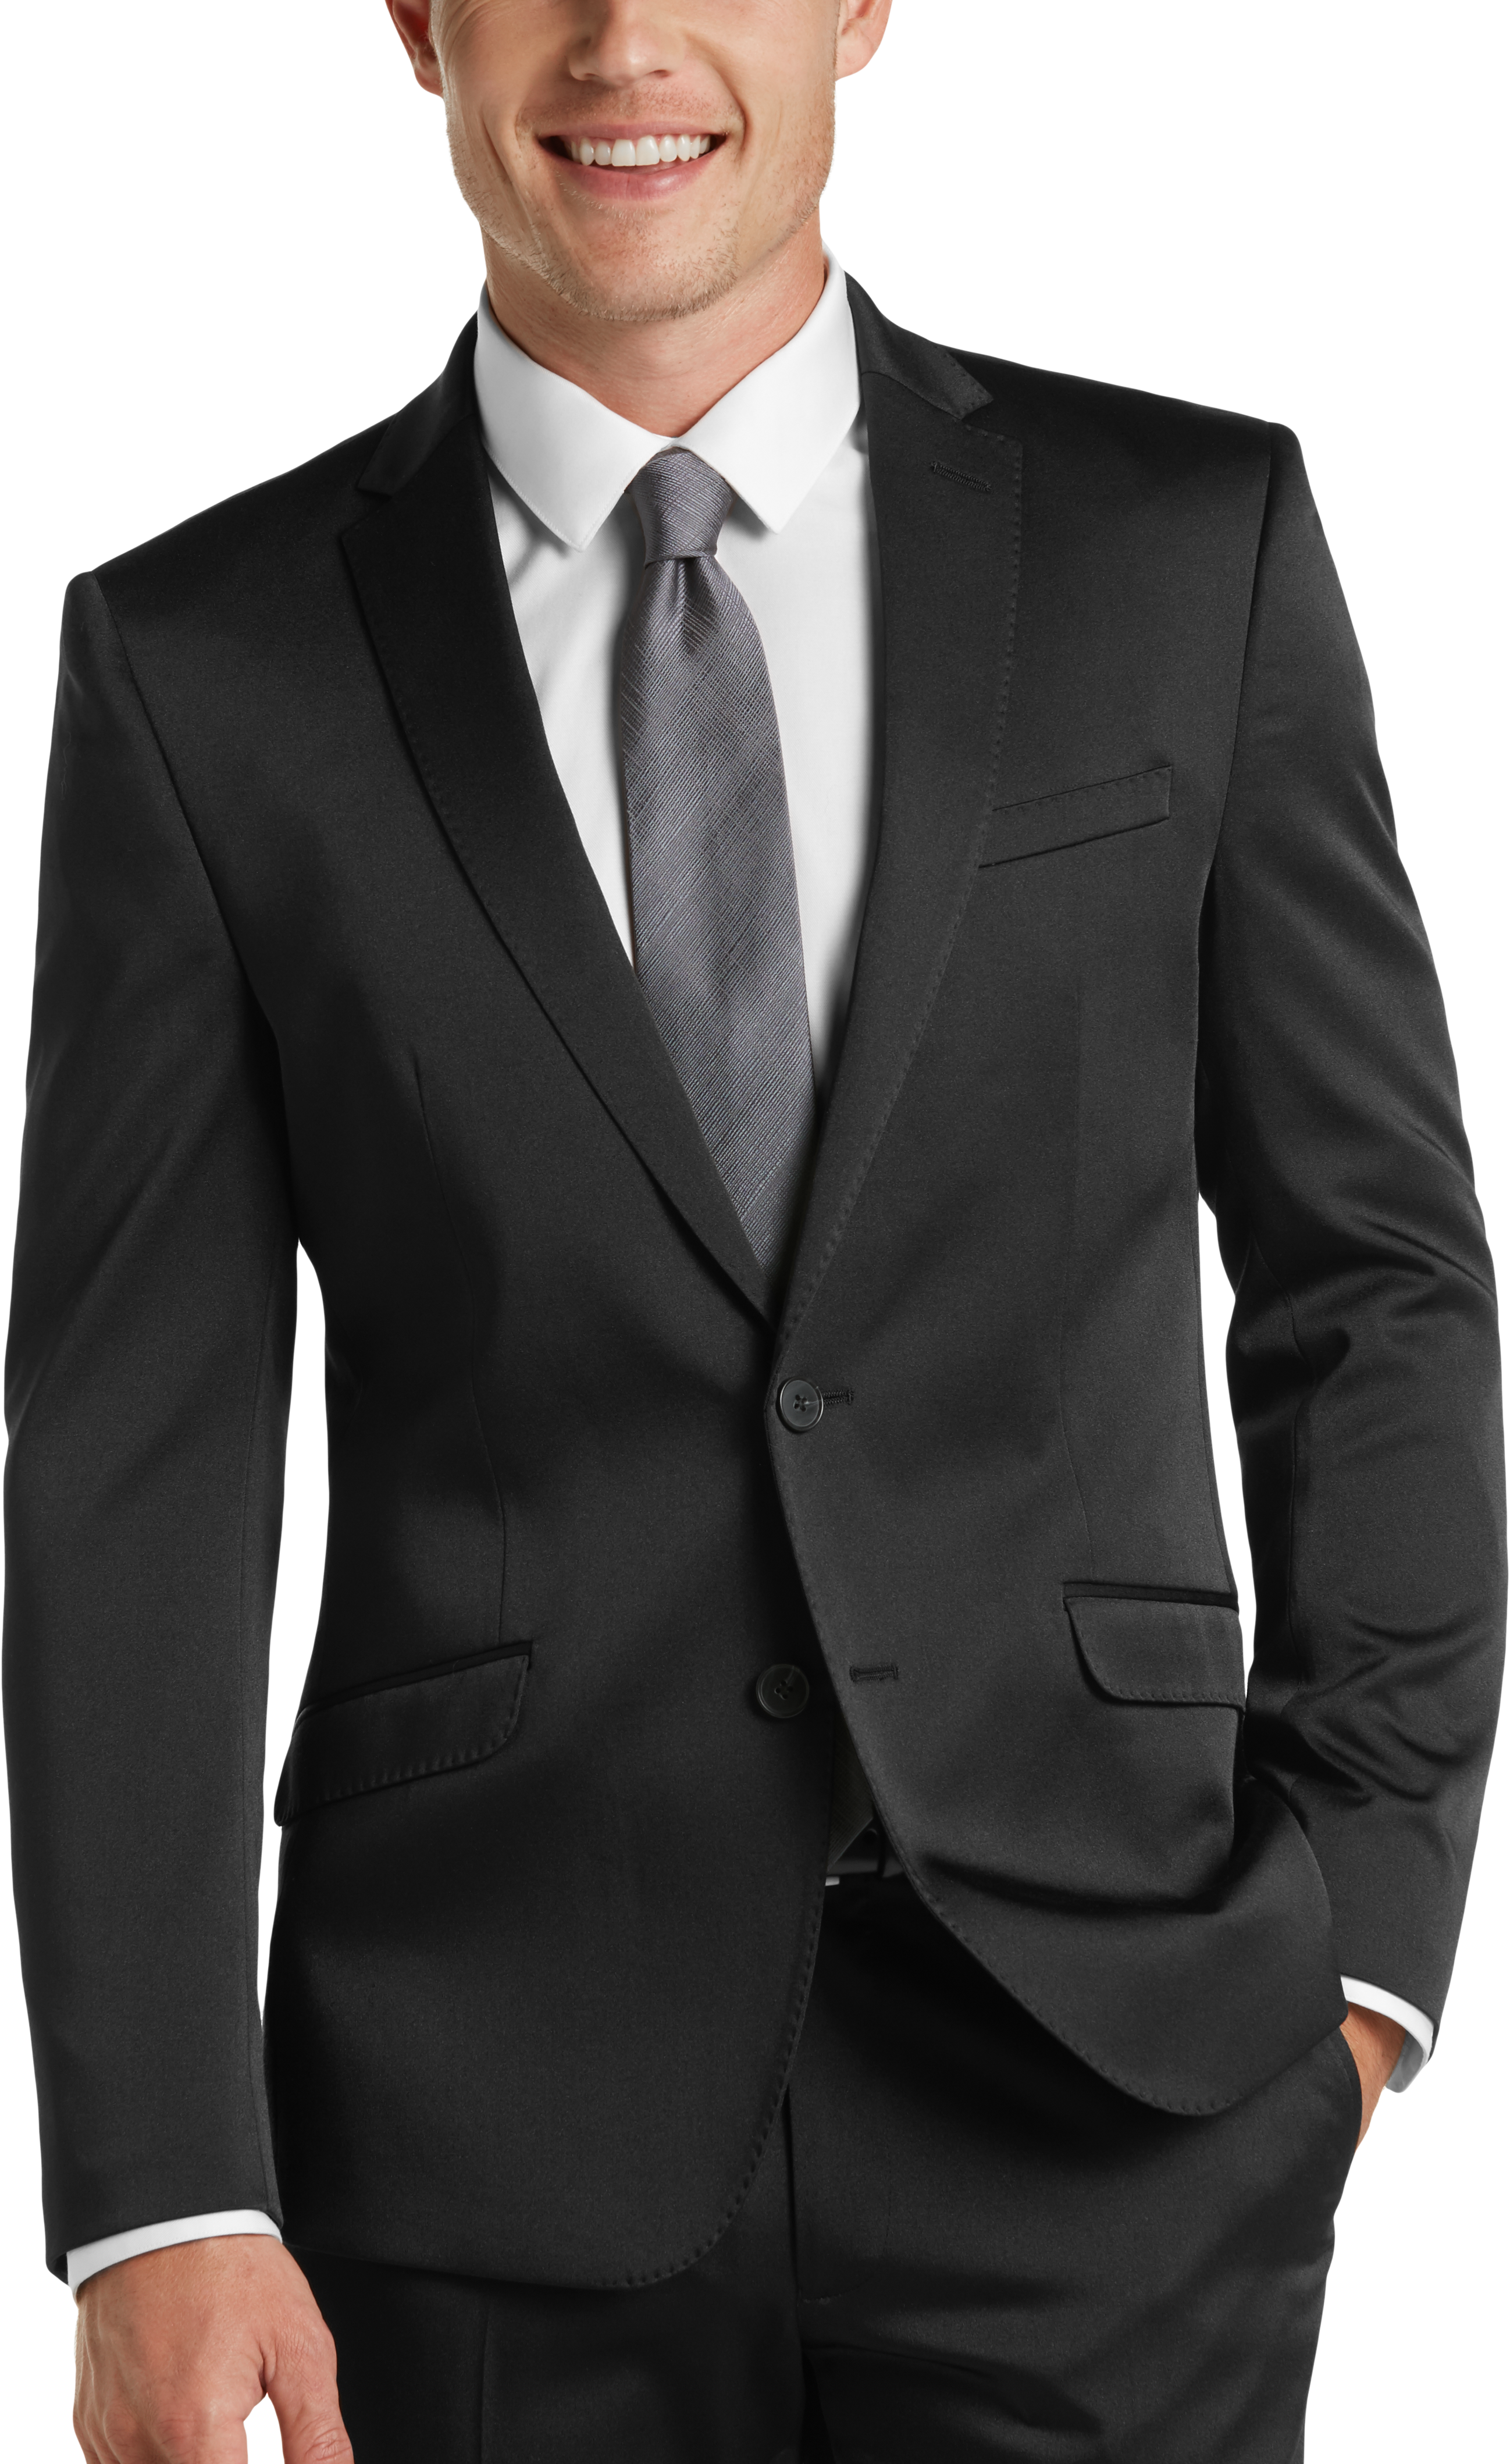 Awearness Kenneth Cole AWEAR-TECH Black Extreme Slim Fit Suit - Men's ...